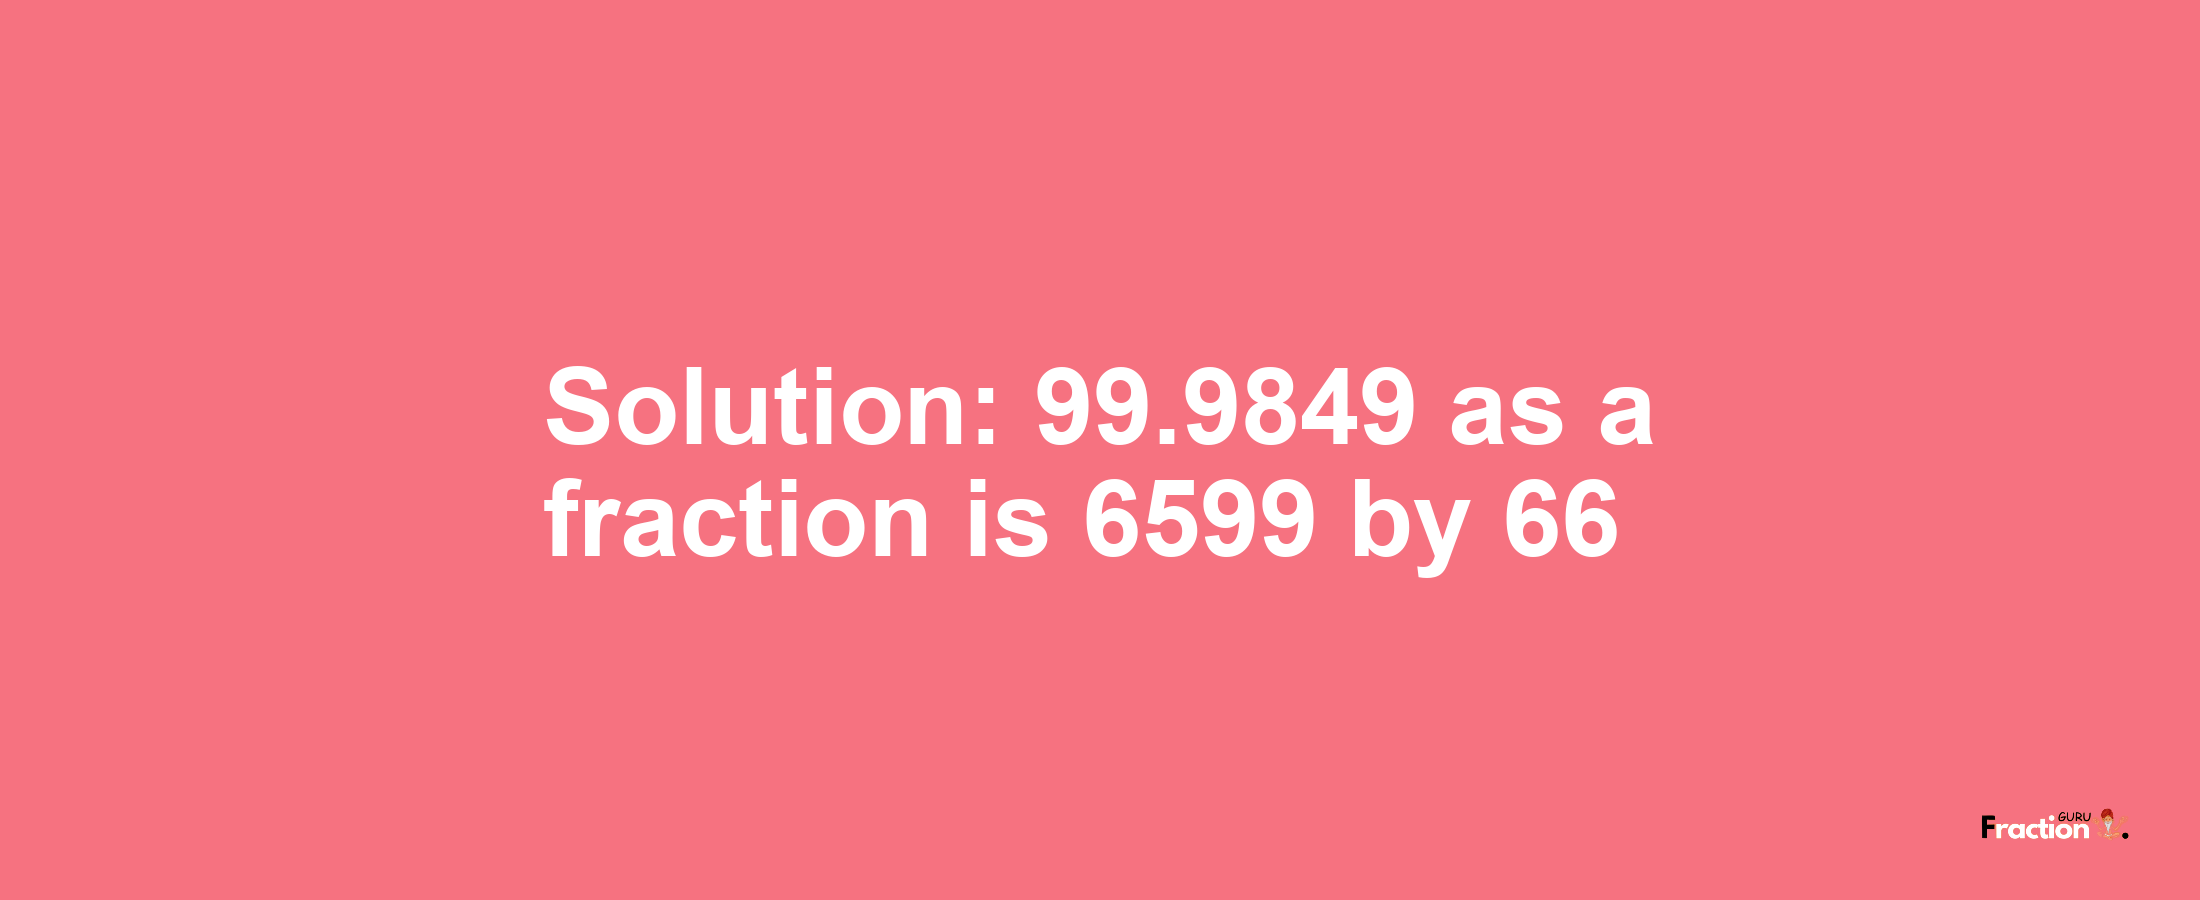 Solution:99.9849 as a fraction is 6599/66